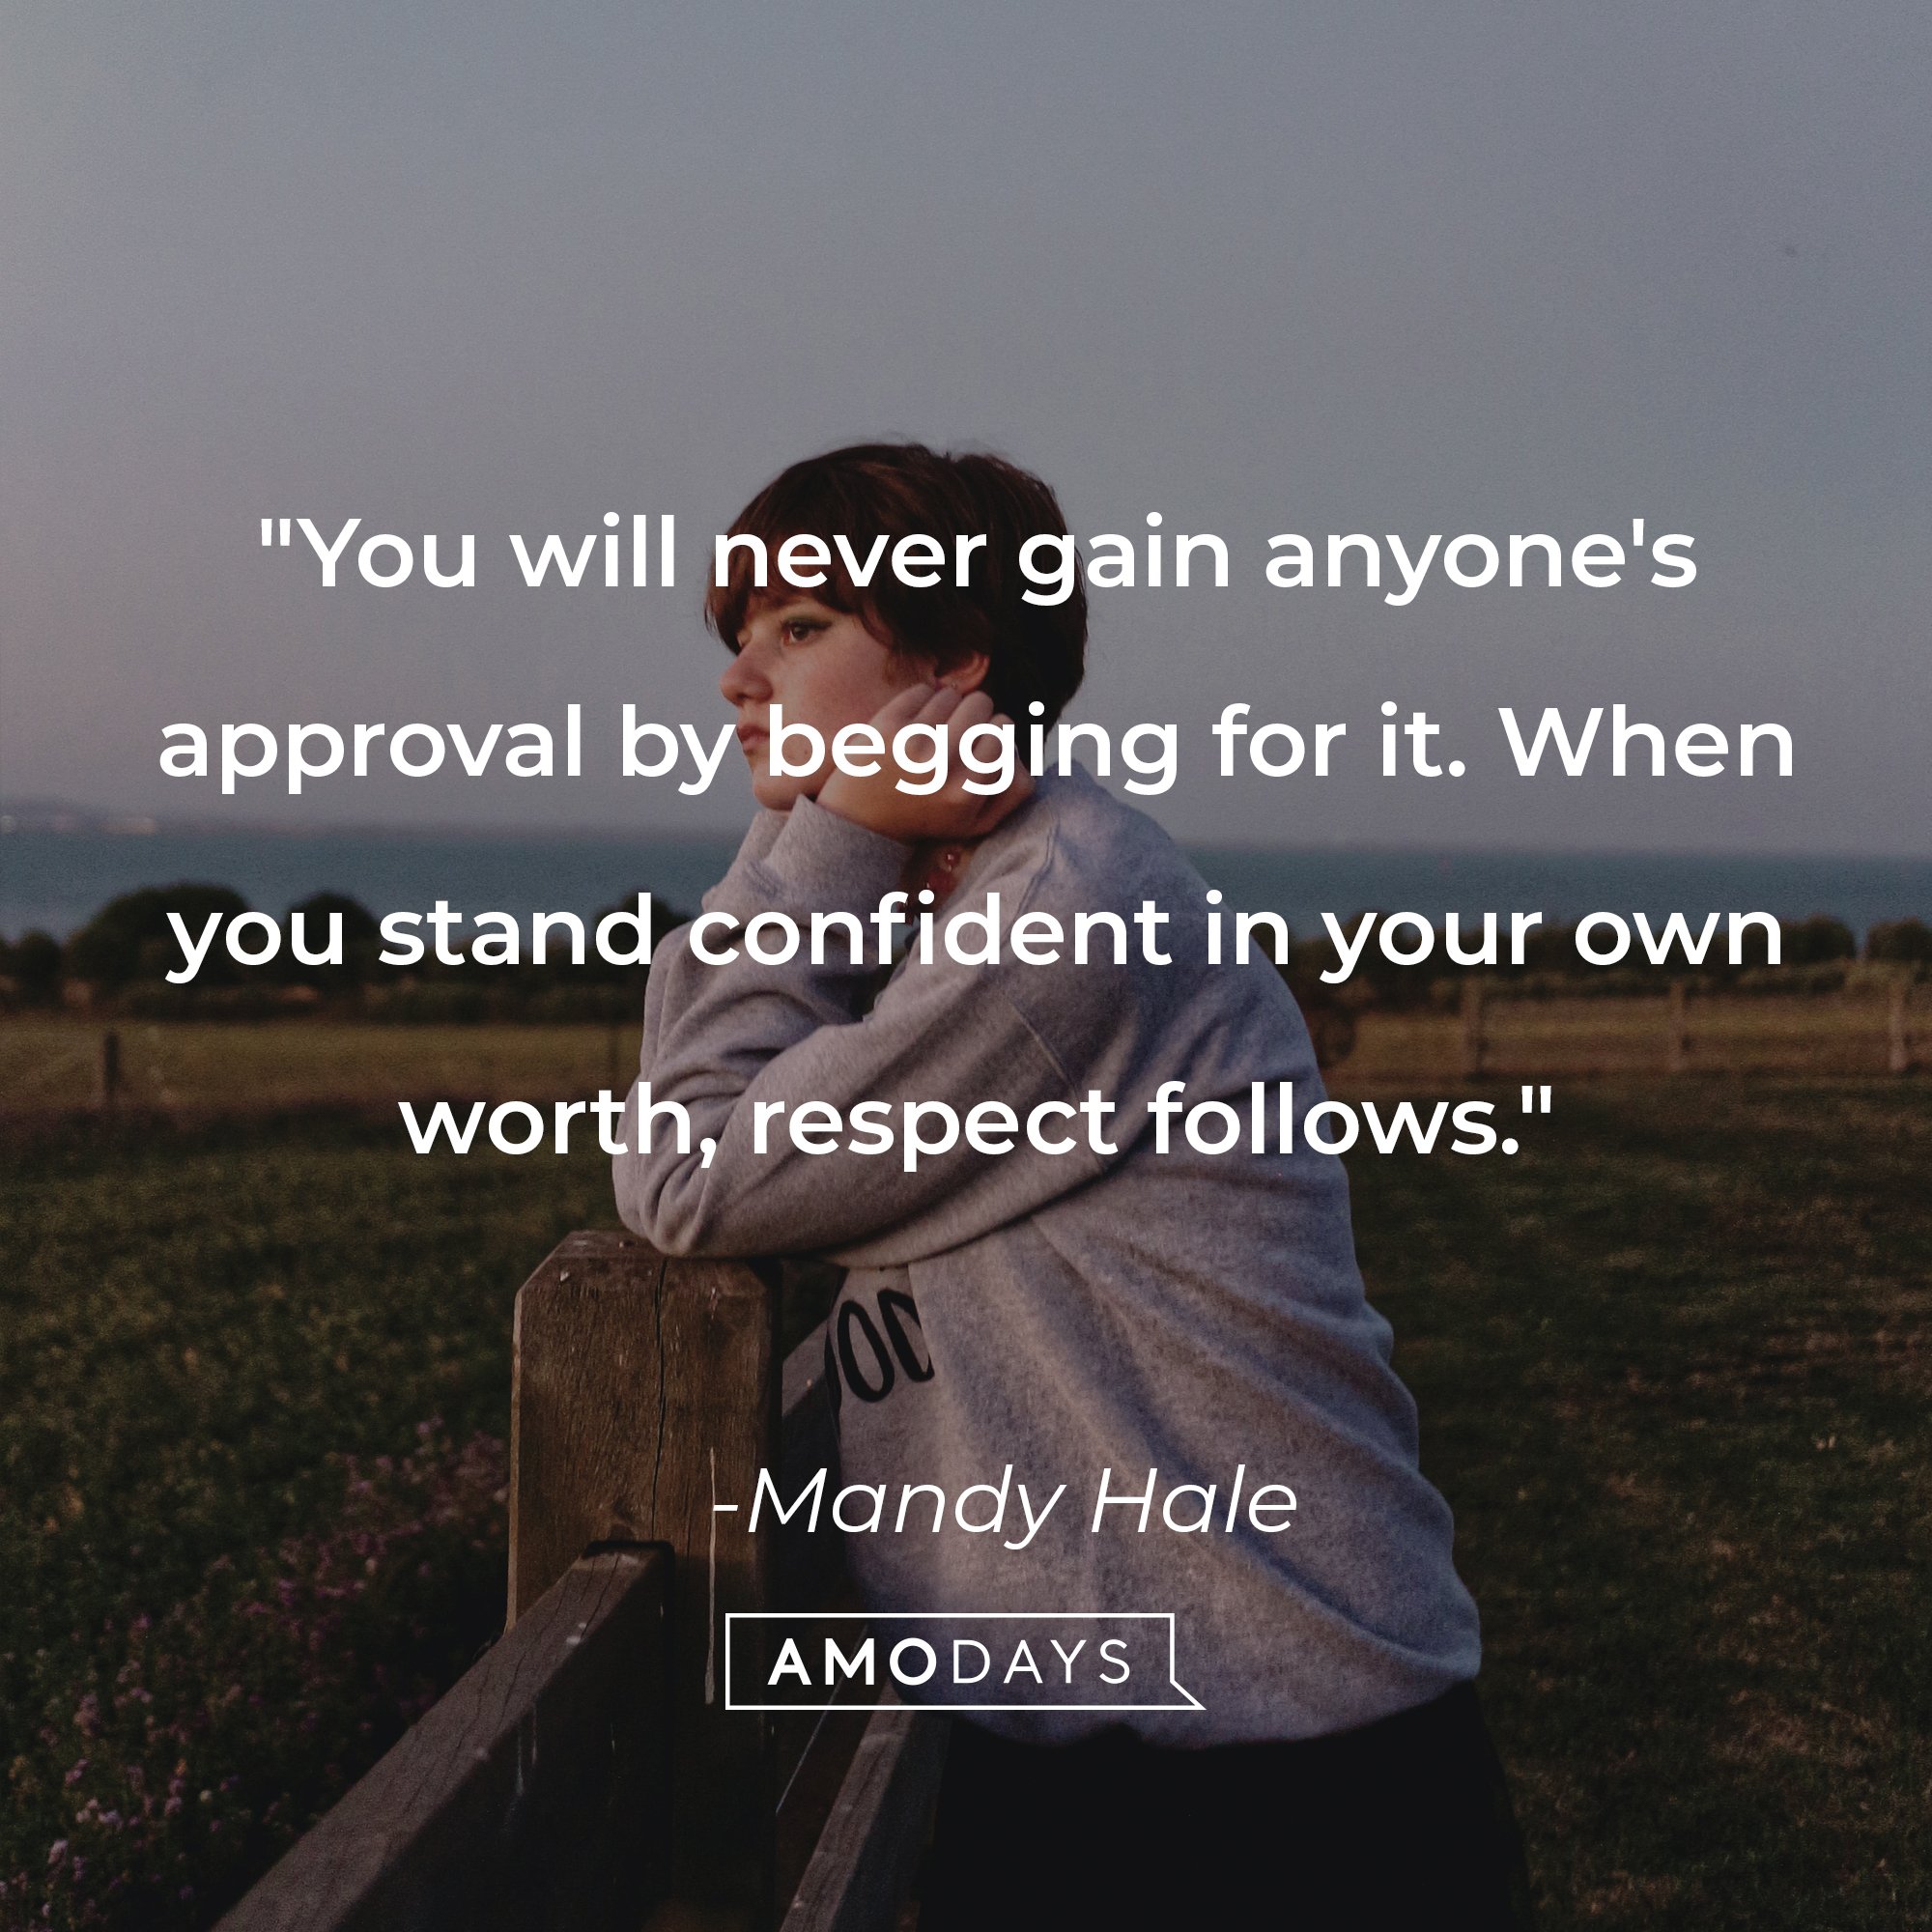 Mandy Hale's quote: "You will never gain anyone's approval by begging for it. When you stand confident in your own worth, respect follows." | Image: AmoDays